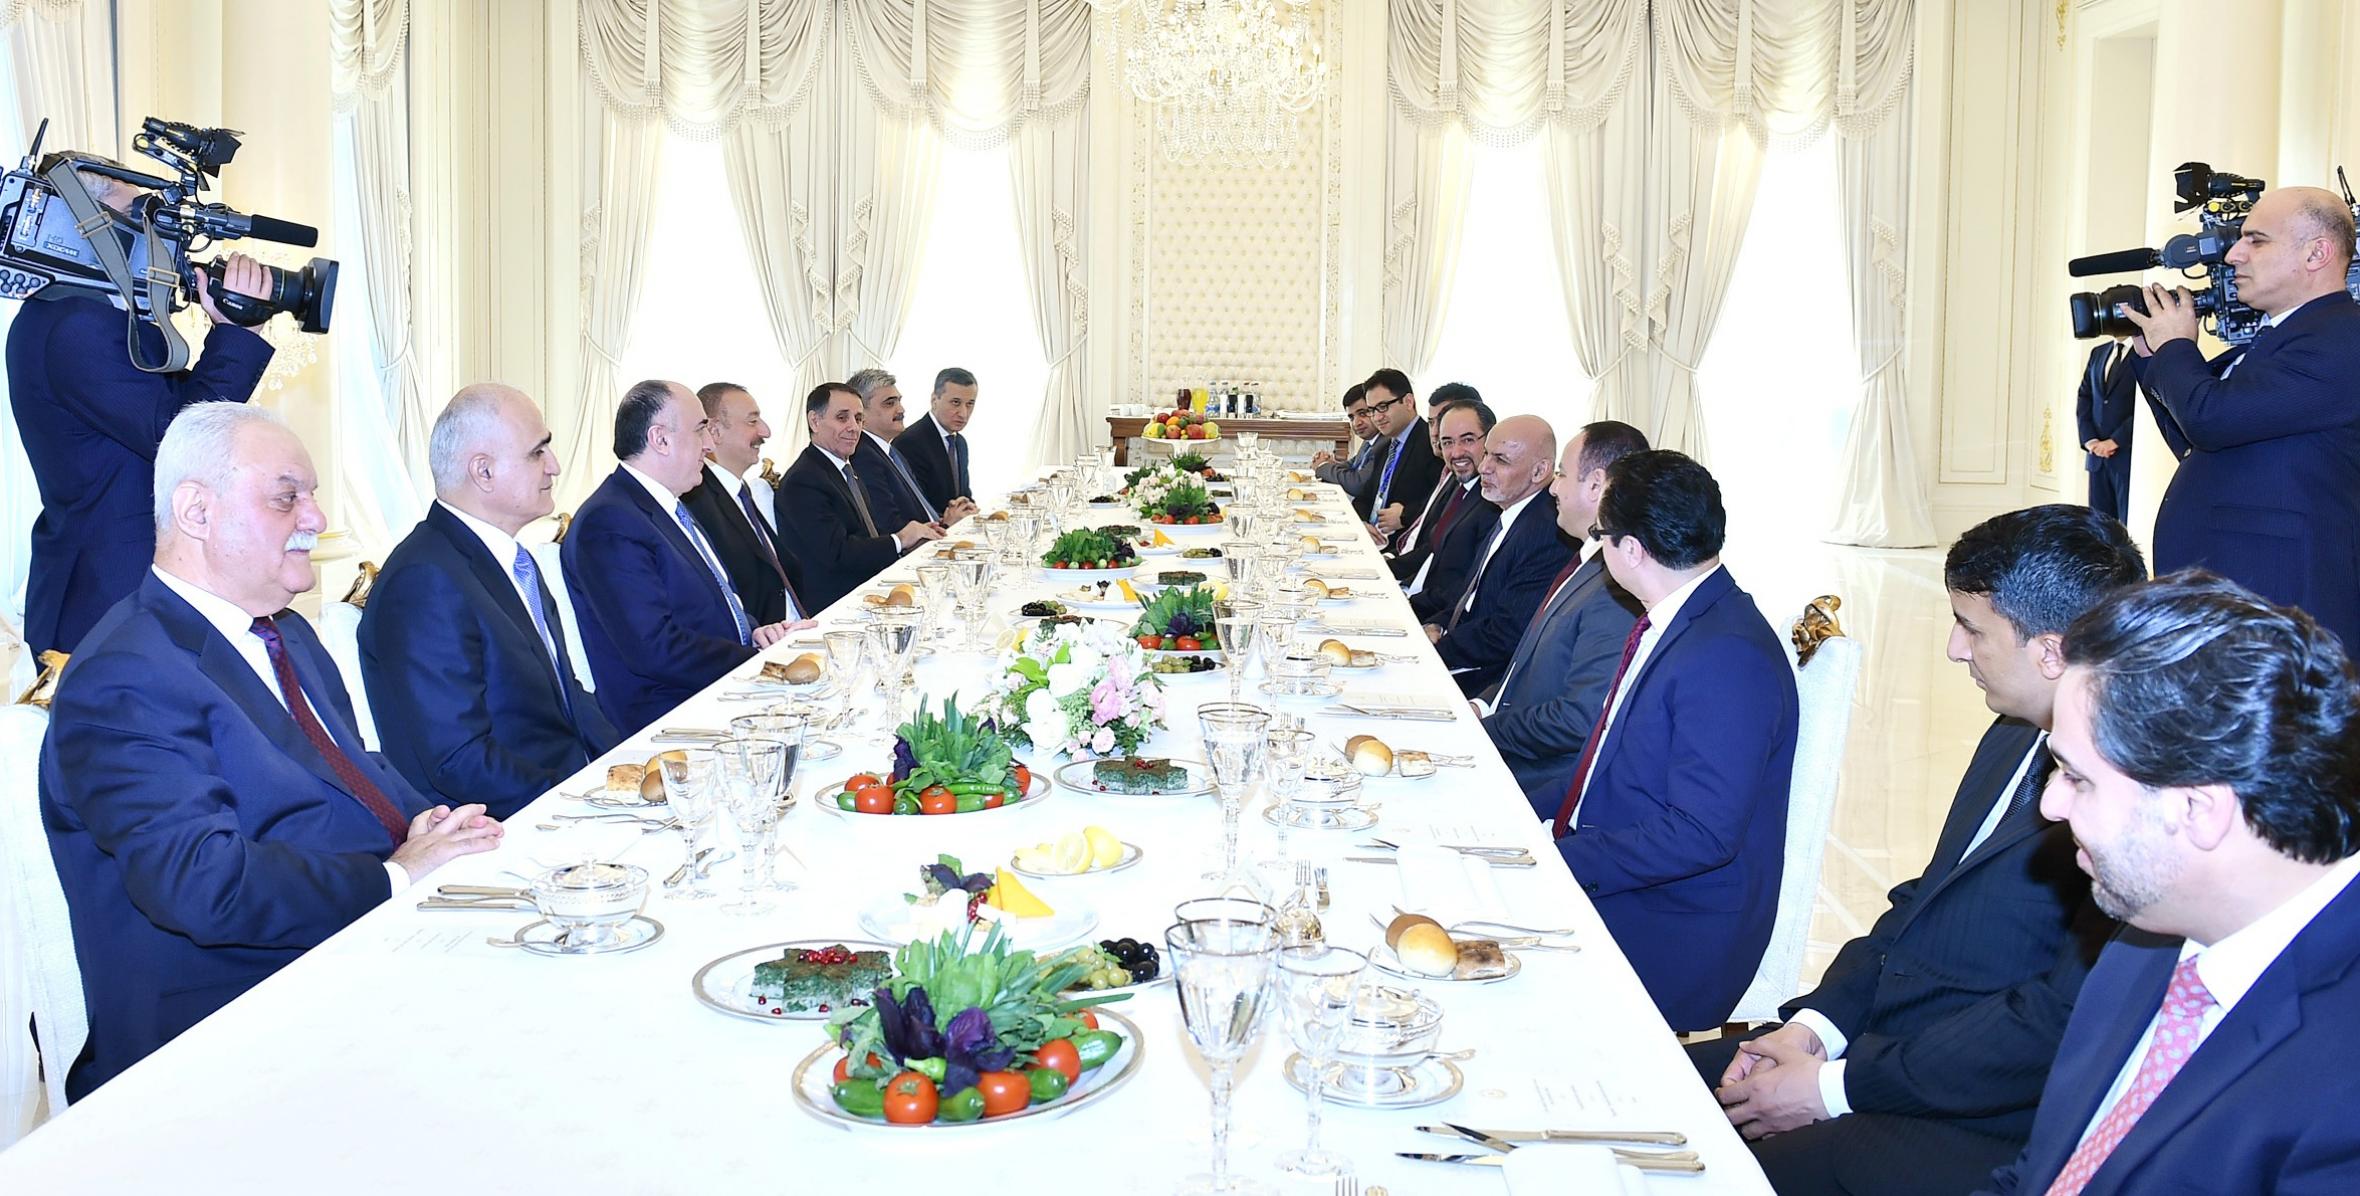 Presidents of Azerbaijan and Afghanistan had joint working dinner